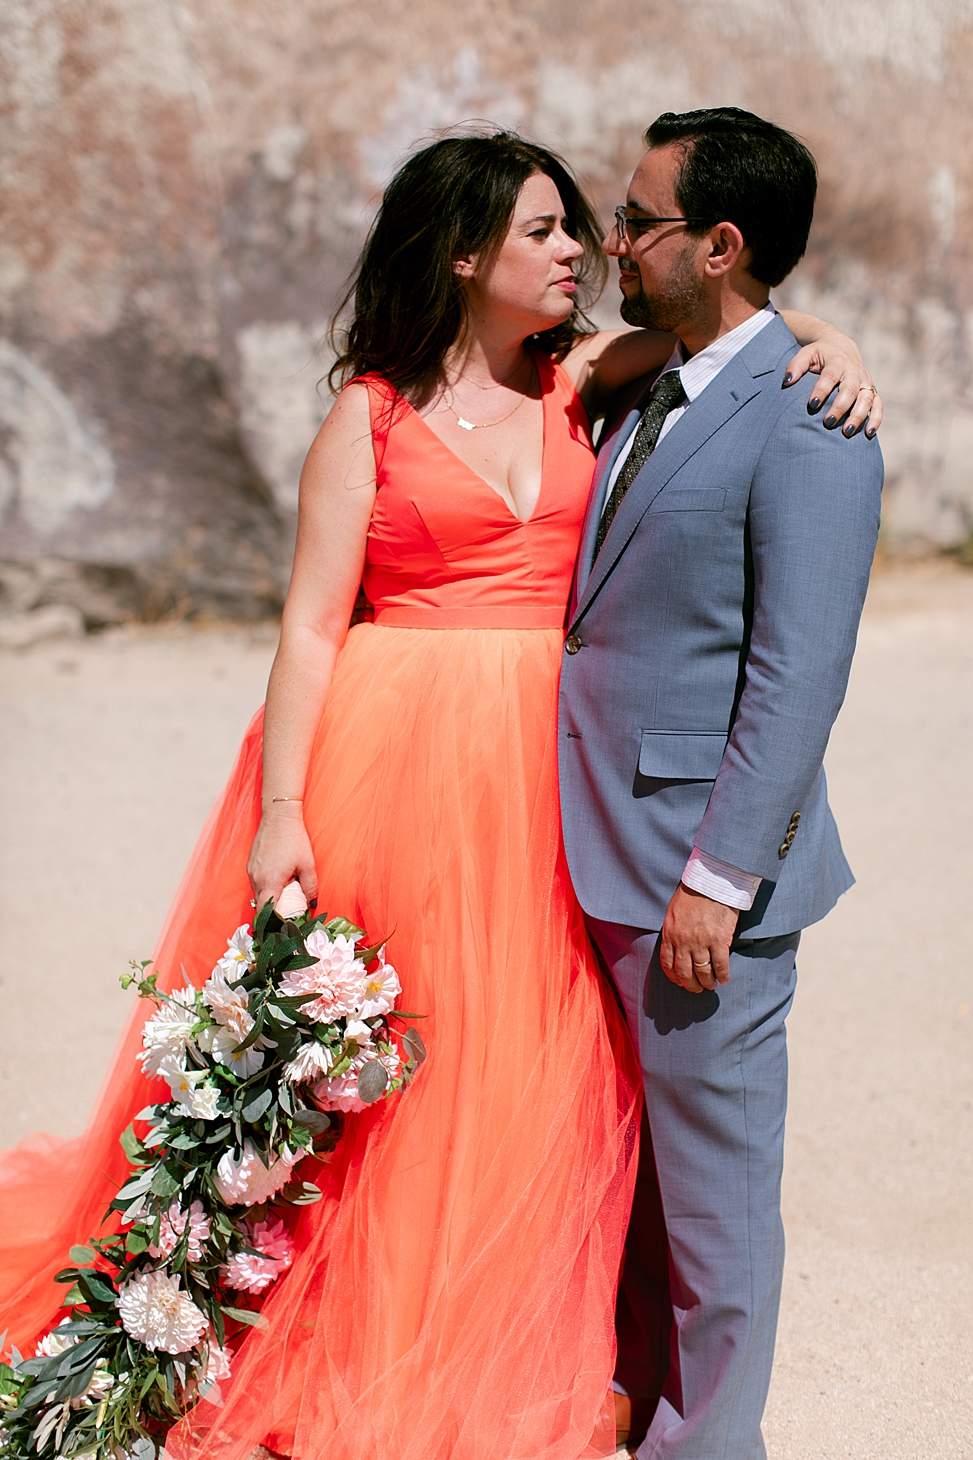 Woman in orange dress, holding a fake wedding flower whip, and man in suit, embrace in the desert